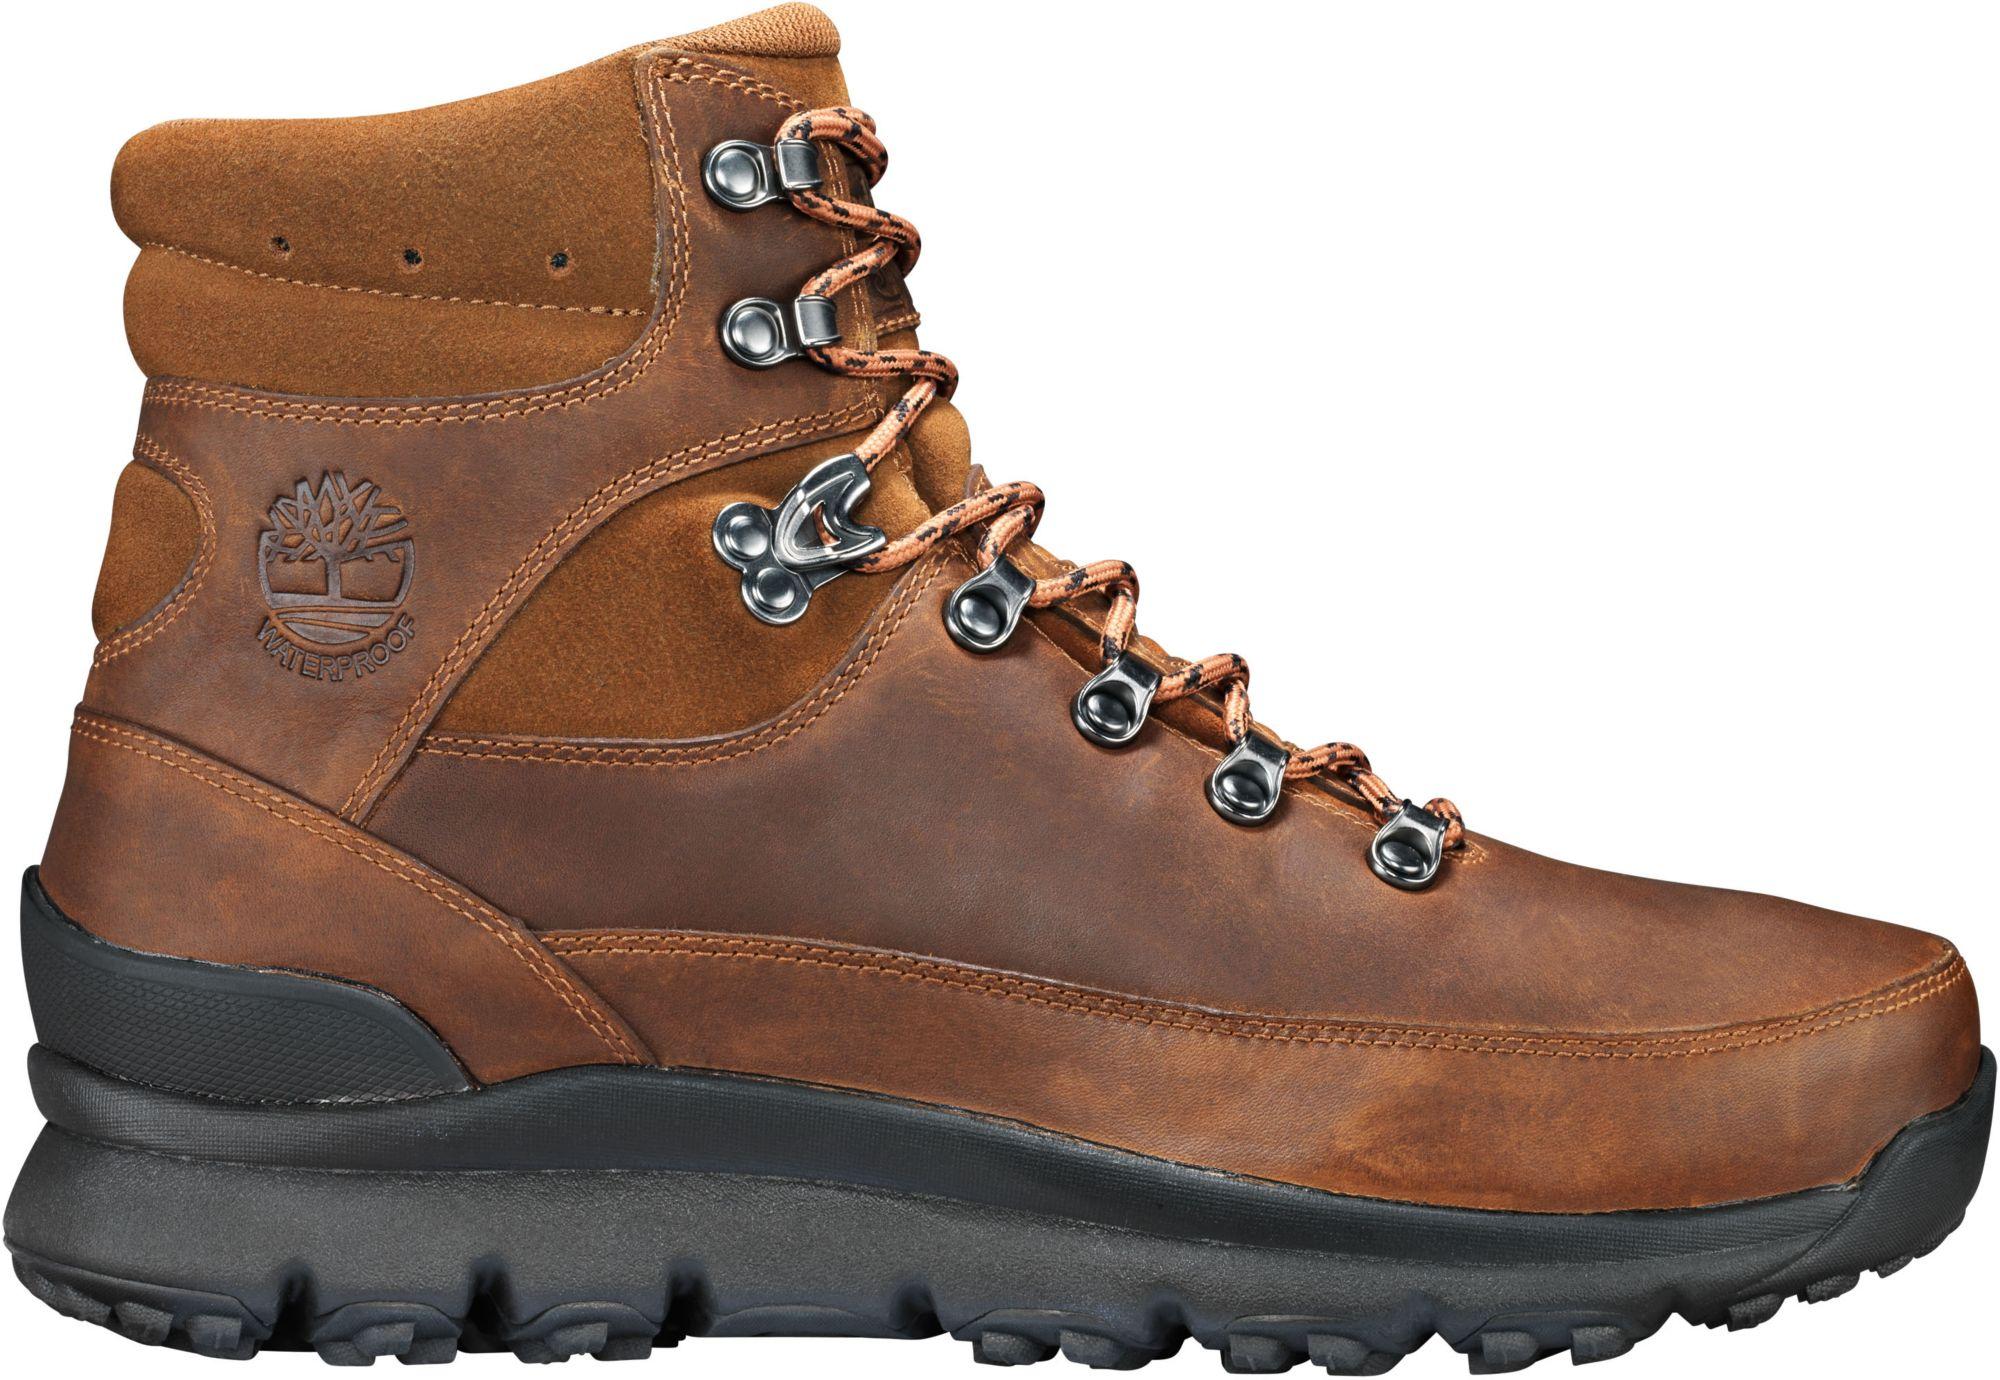 Timberland World Hiker Mid Waterproof Hiking Boots in Brown for Men - Lyst